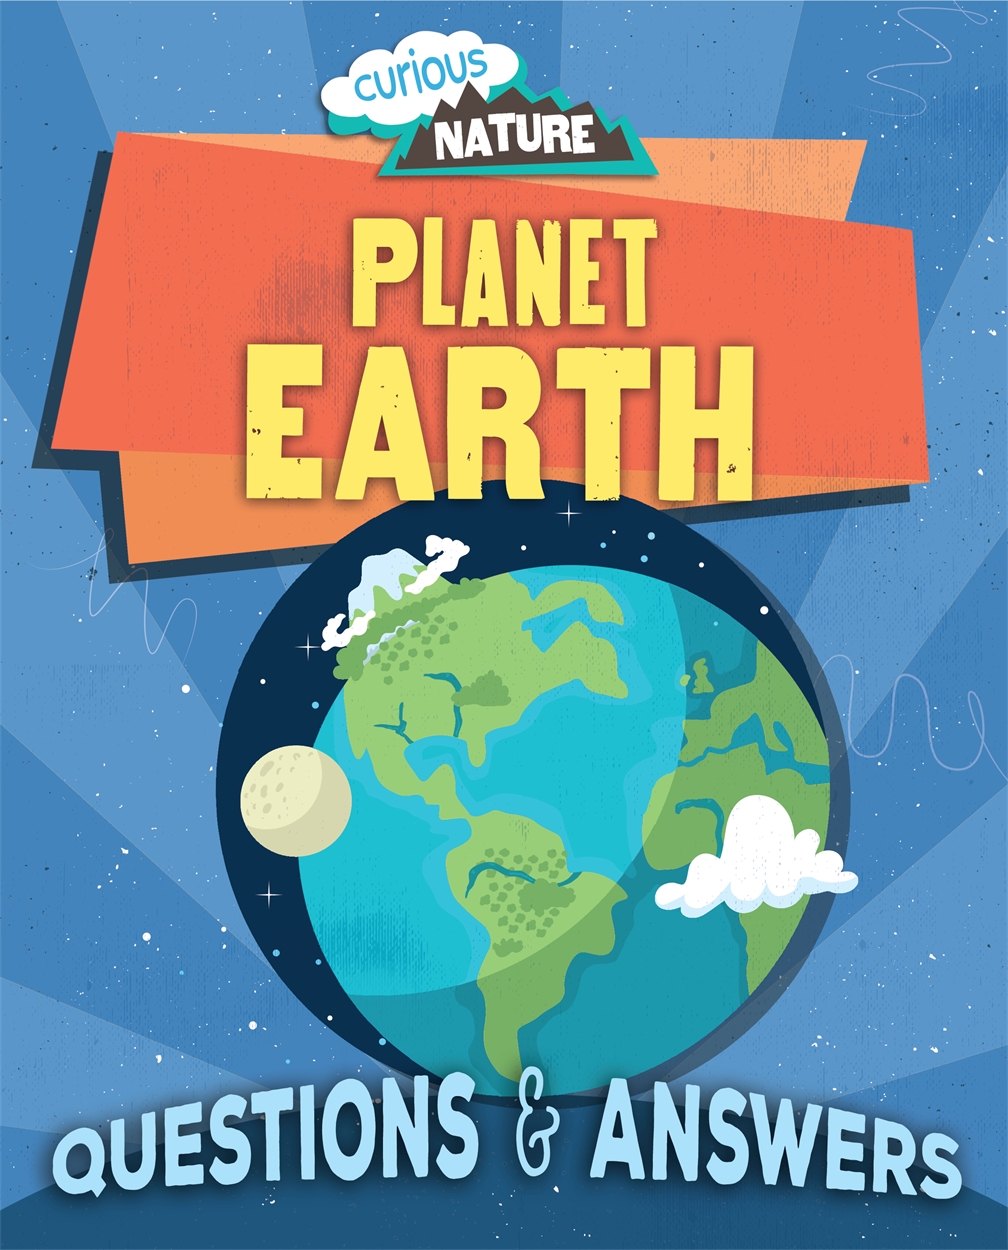 Curious Nature: Planet Earth by Dickmann | Hachette